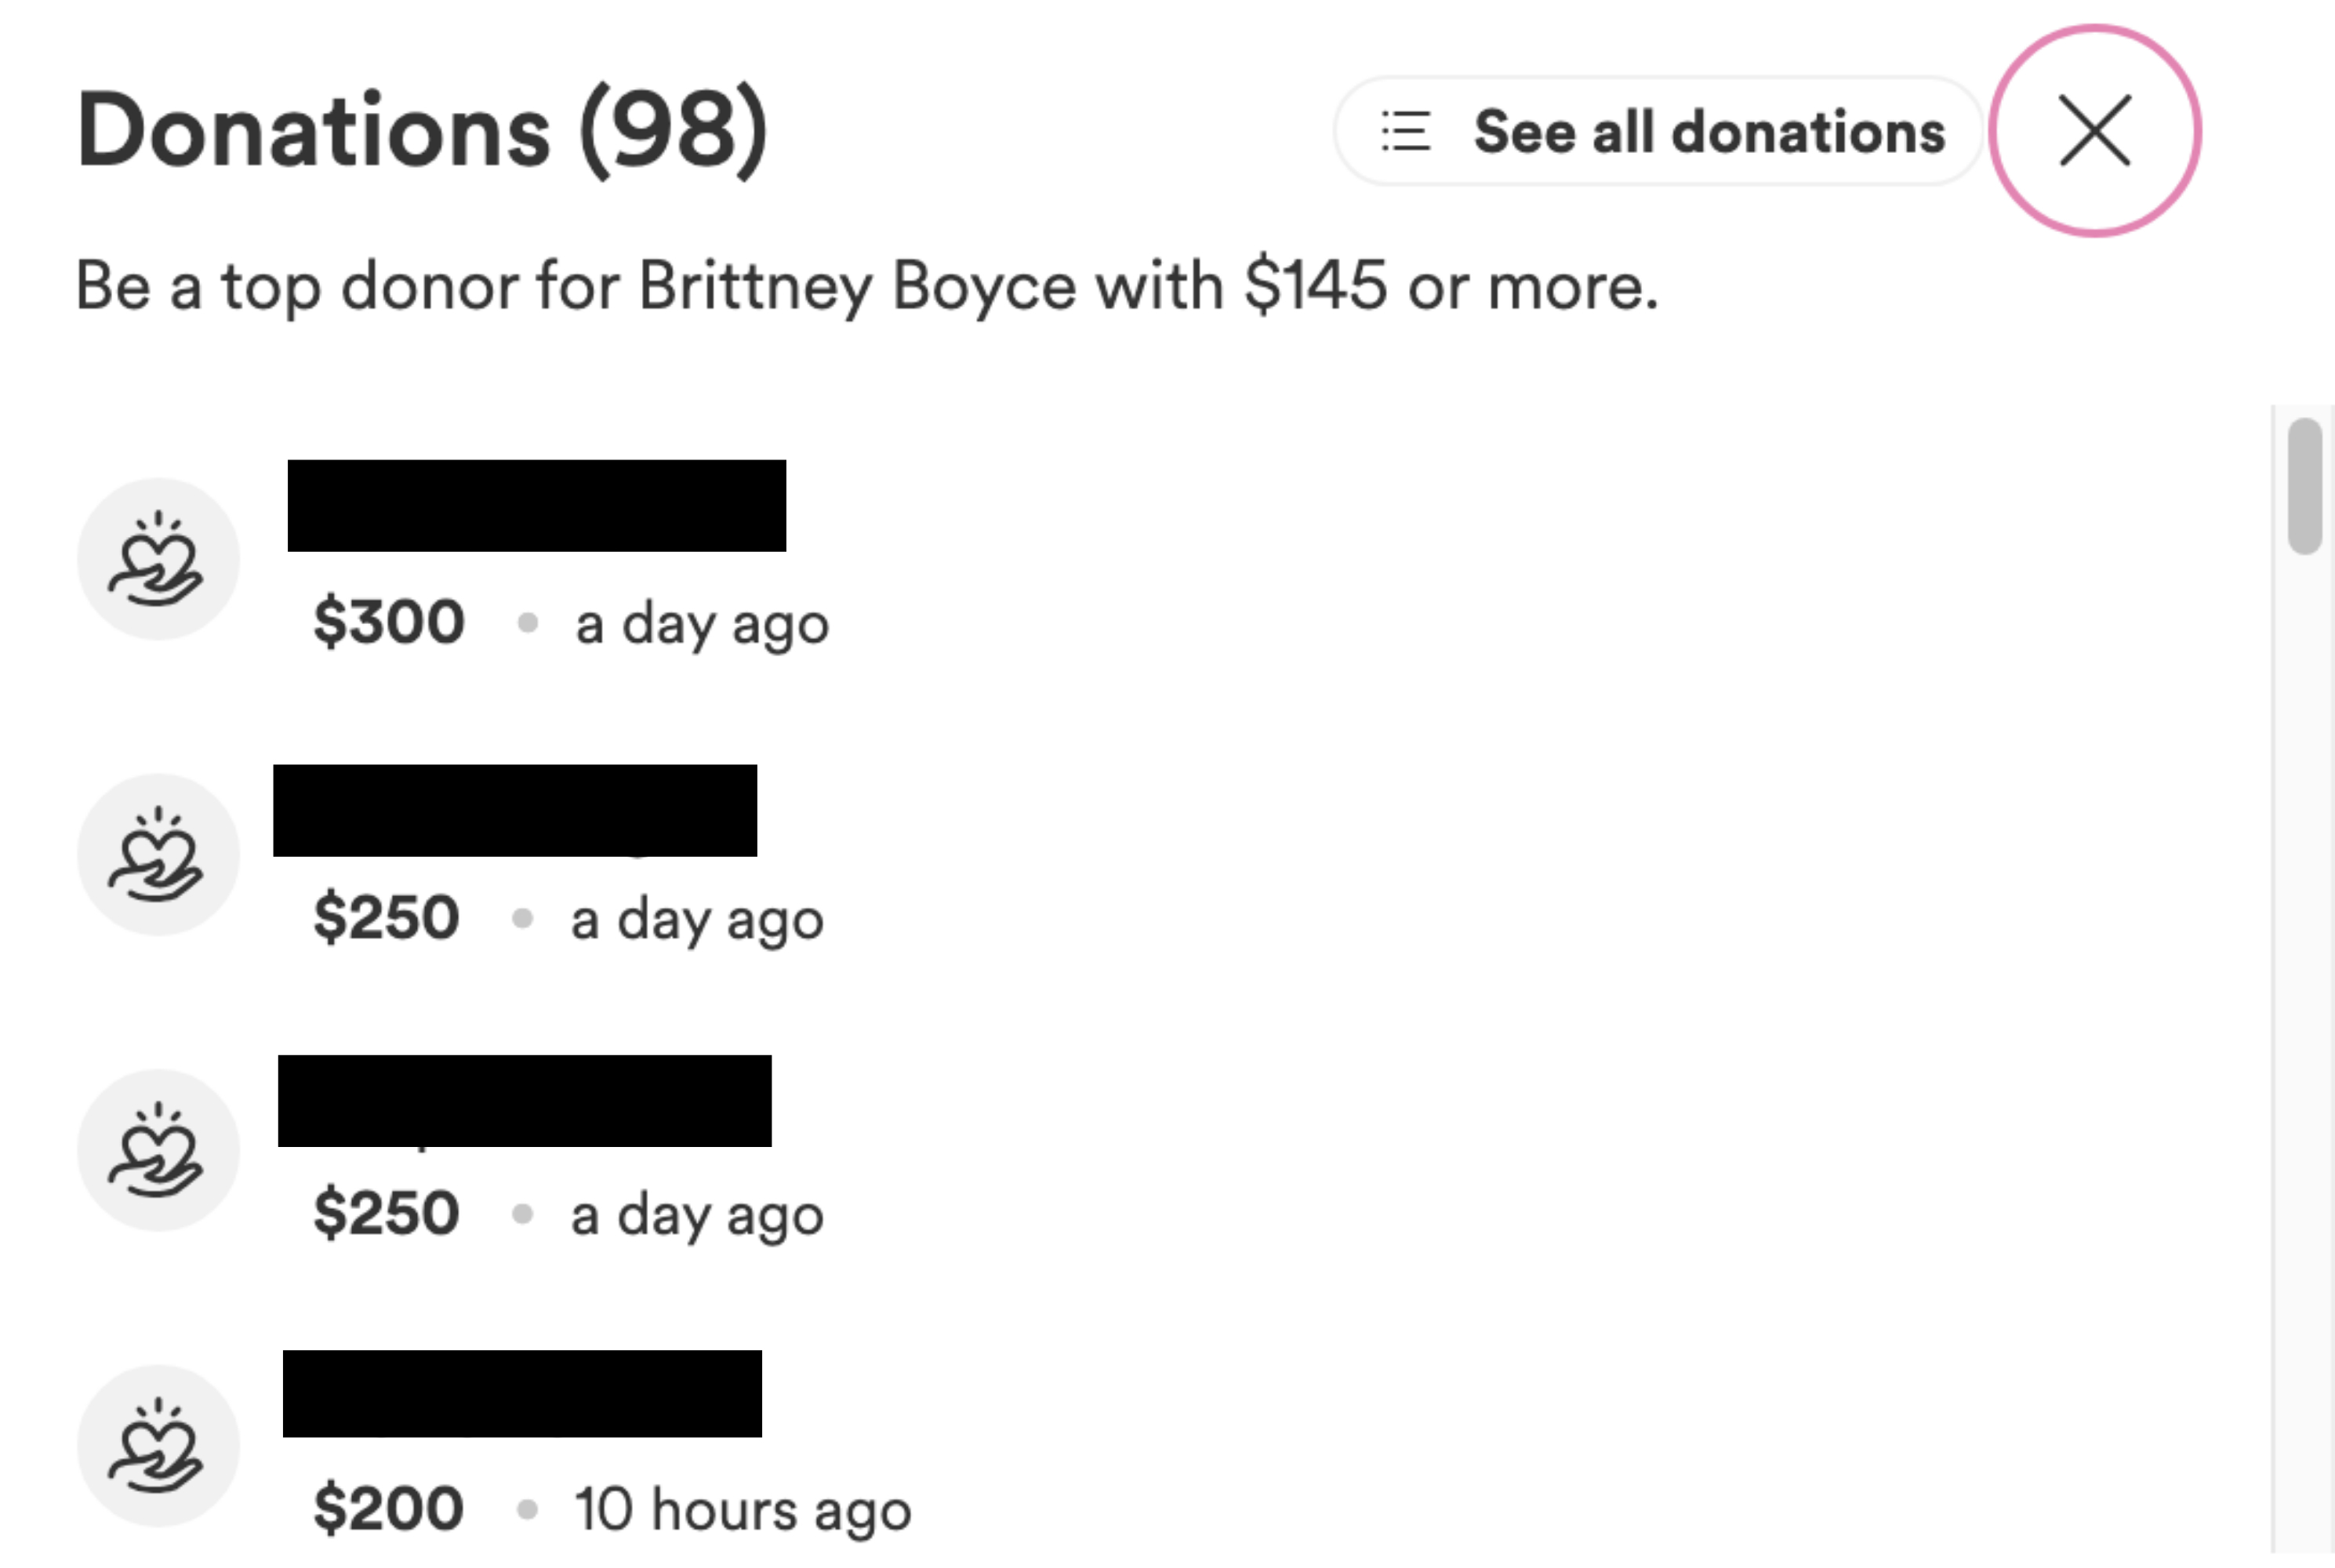 list of the donation amounts given